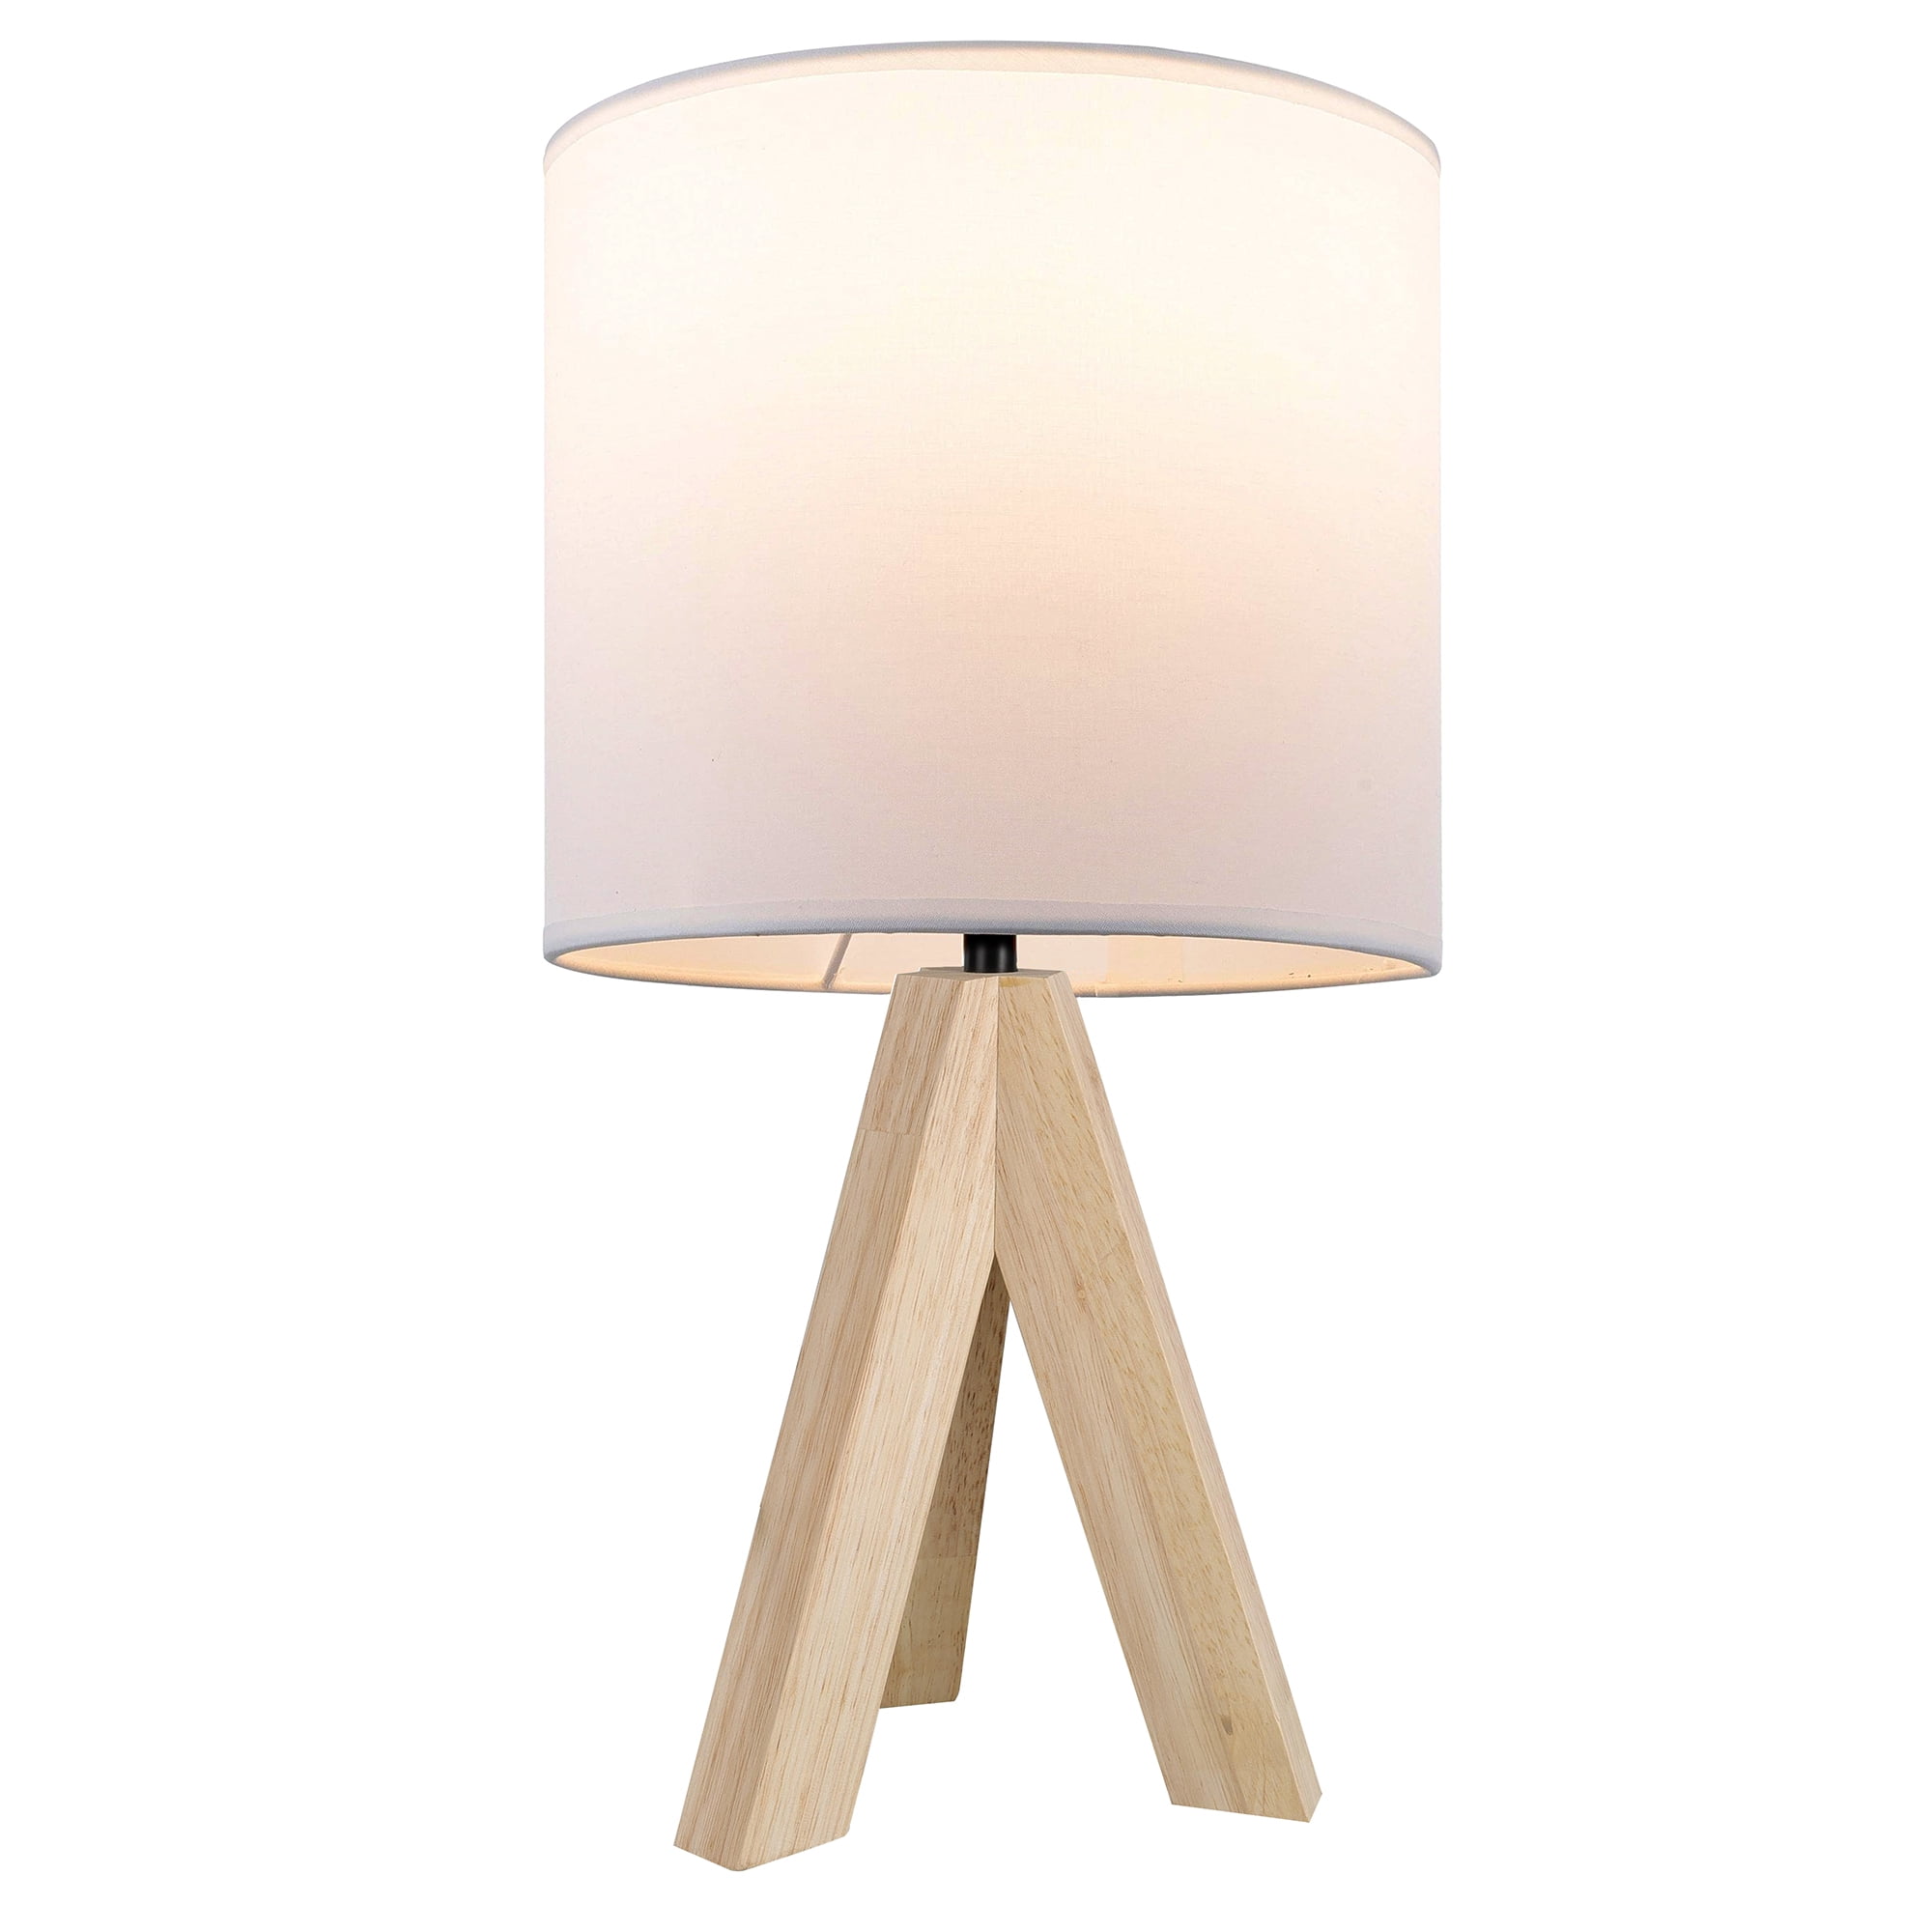 Mainstays Tripod Oak Table Lamp with Classic White Fabric Shade, 16.75"H